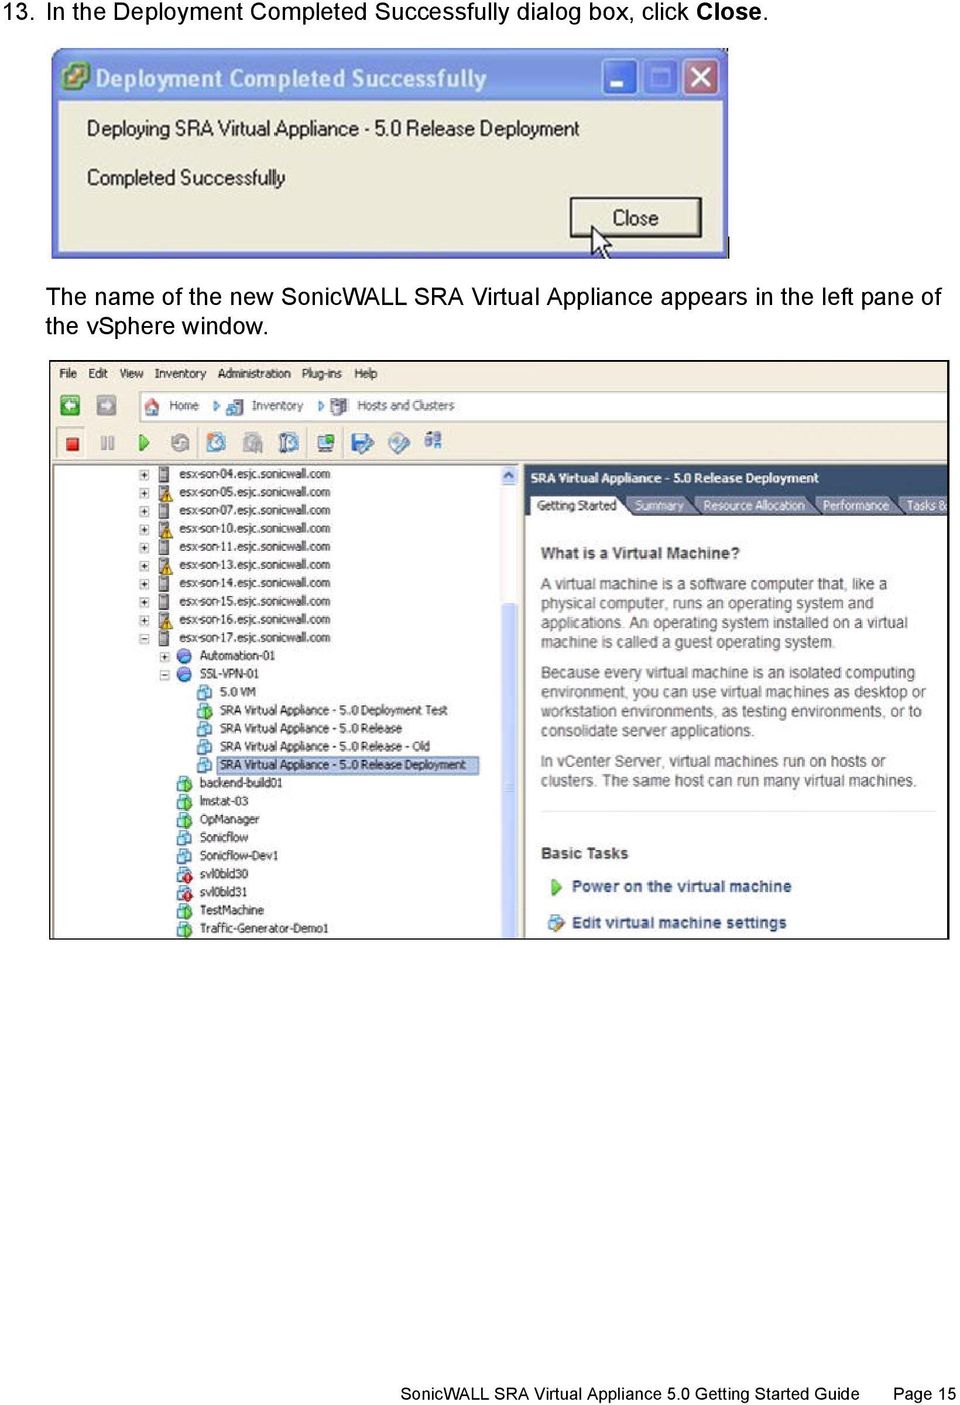 The name of the new SonicWALL SRA Virtual Appliance